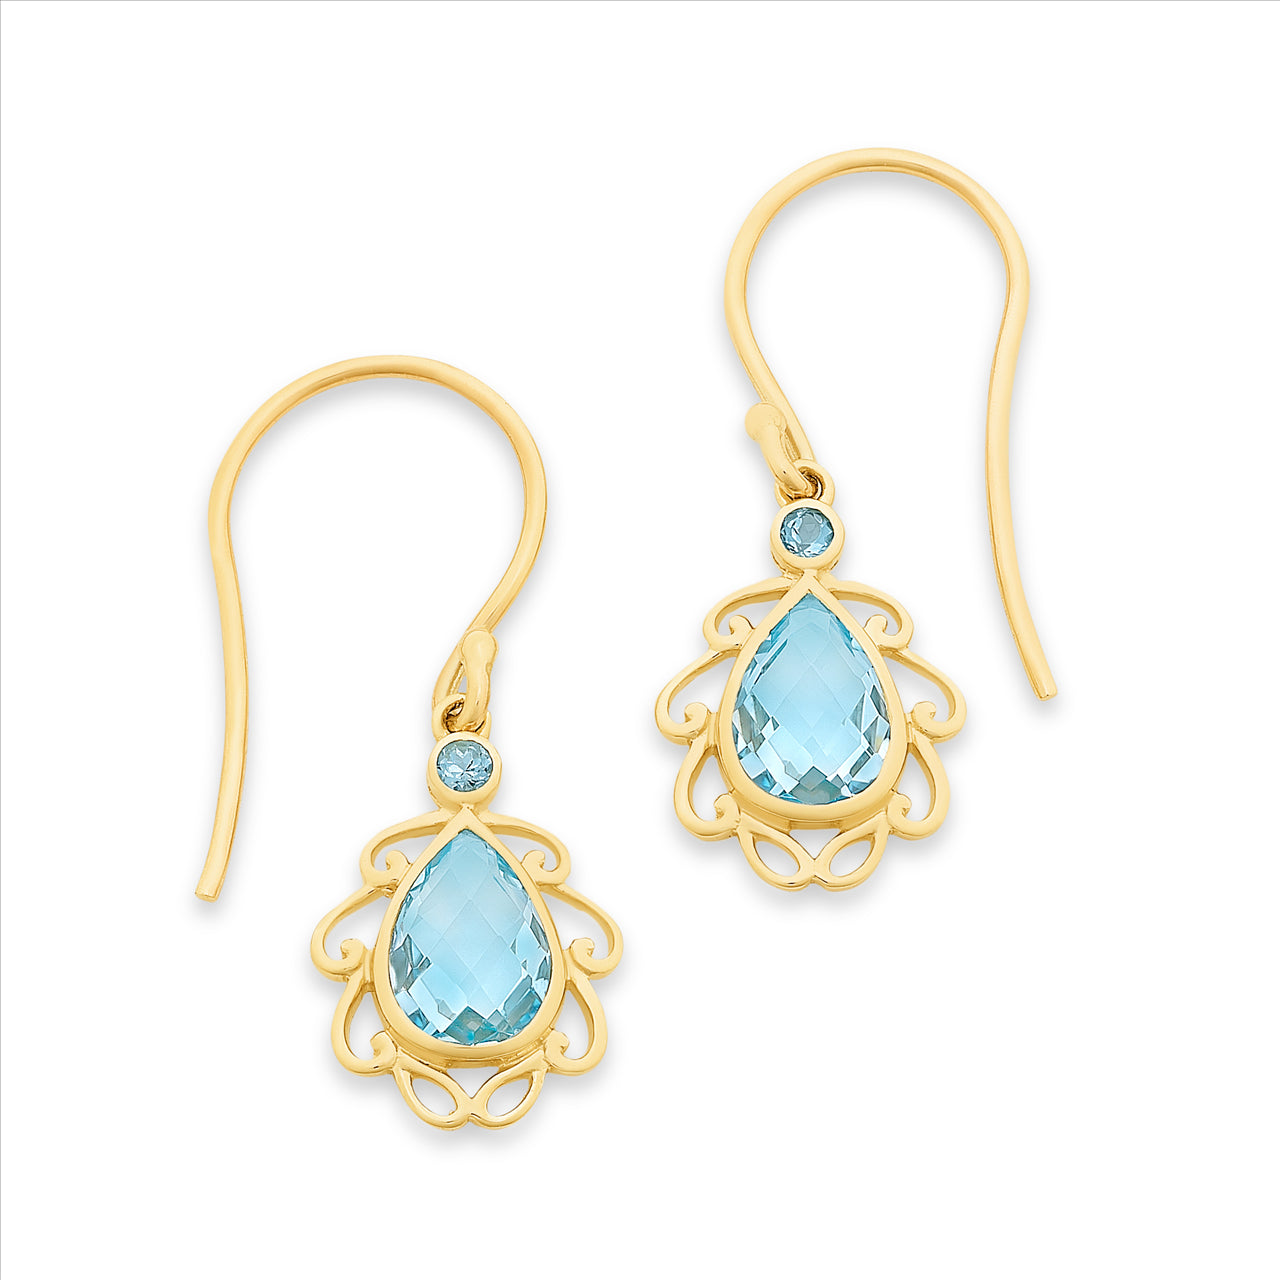 9Ct Yellow Gold Filigree Drop Earrings With Pear Shaped Light Blue Topaz And Clear Cz